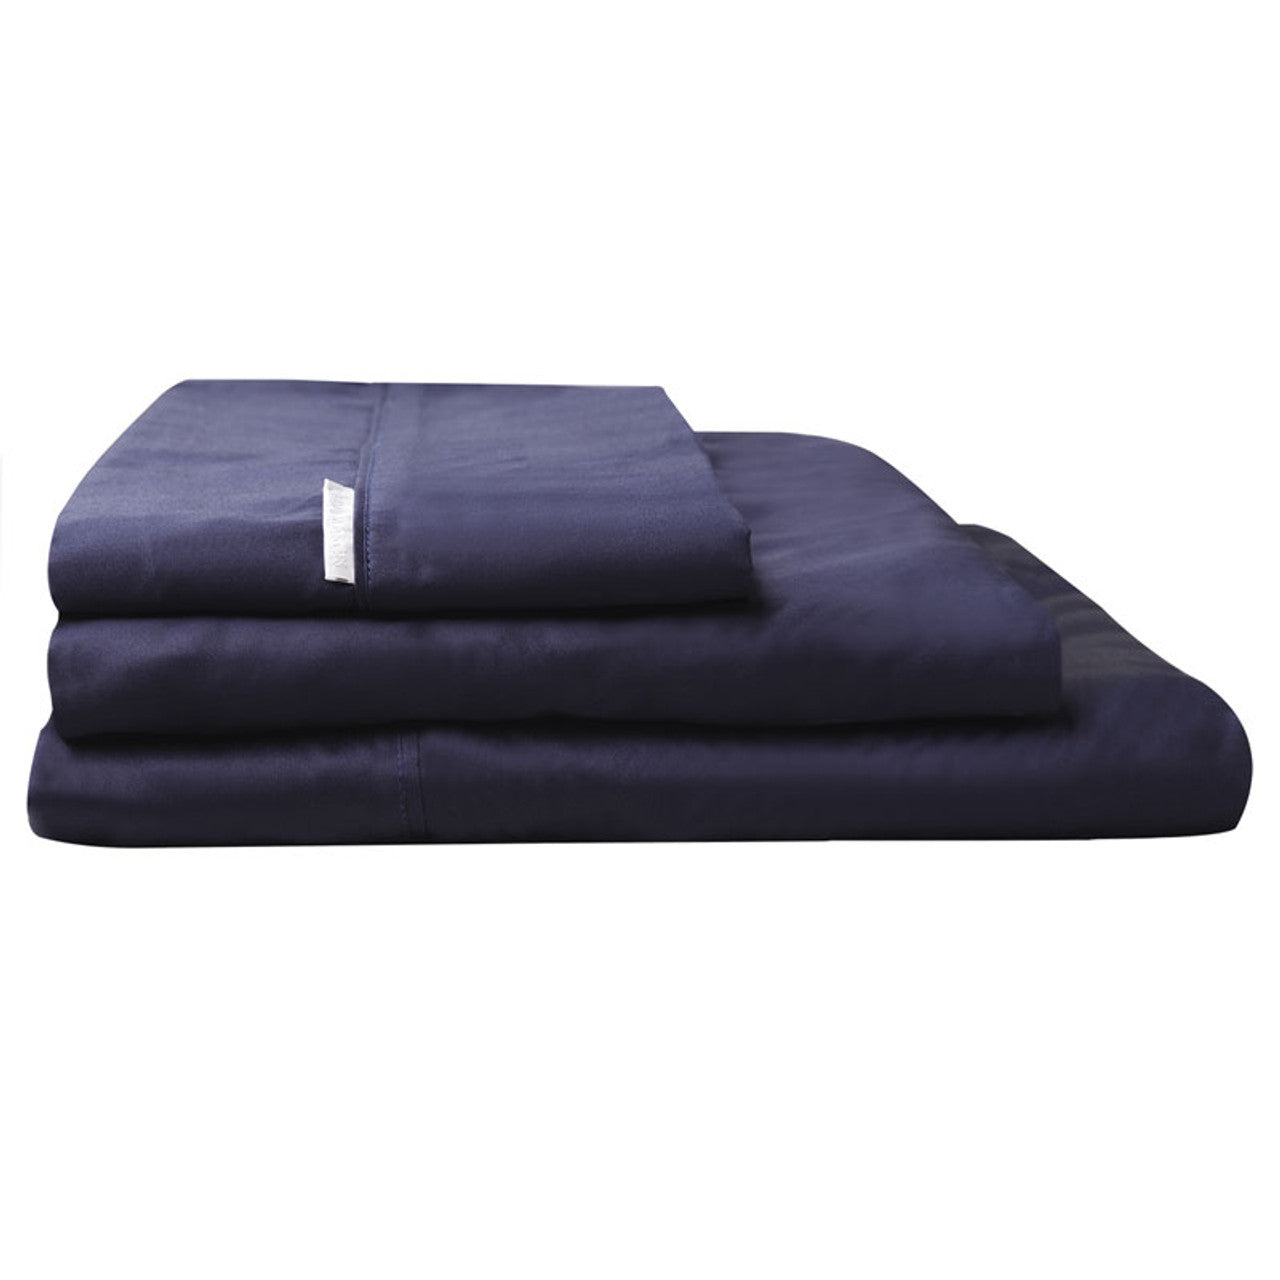 Indulge in the pinnacle of luxury with the Navy Bed Sheet Sets by Logan and Mason. Crafted from pure Egyptian Cotton with an impressive 400 thread count, these sheets offer unparalleled softness and a silky smooth feel. 